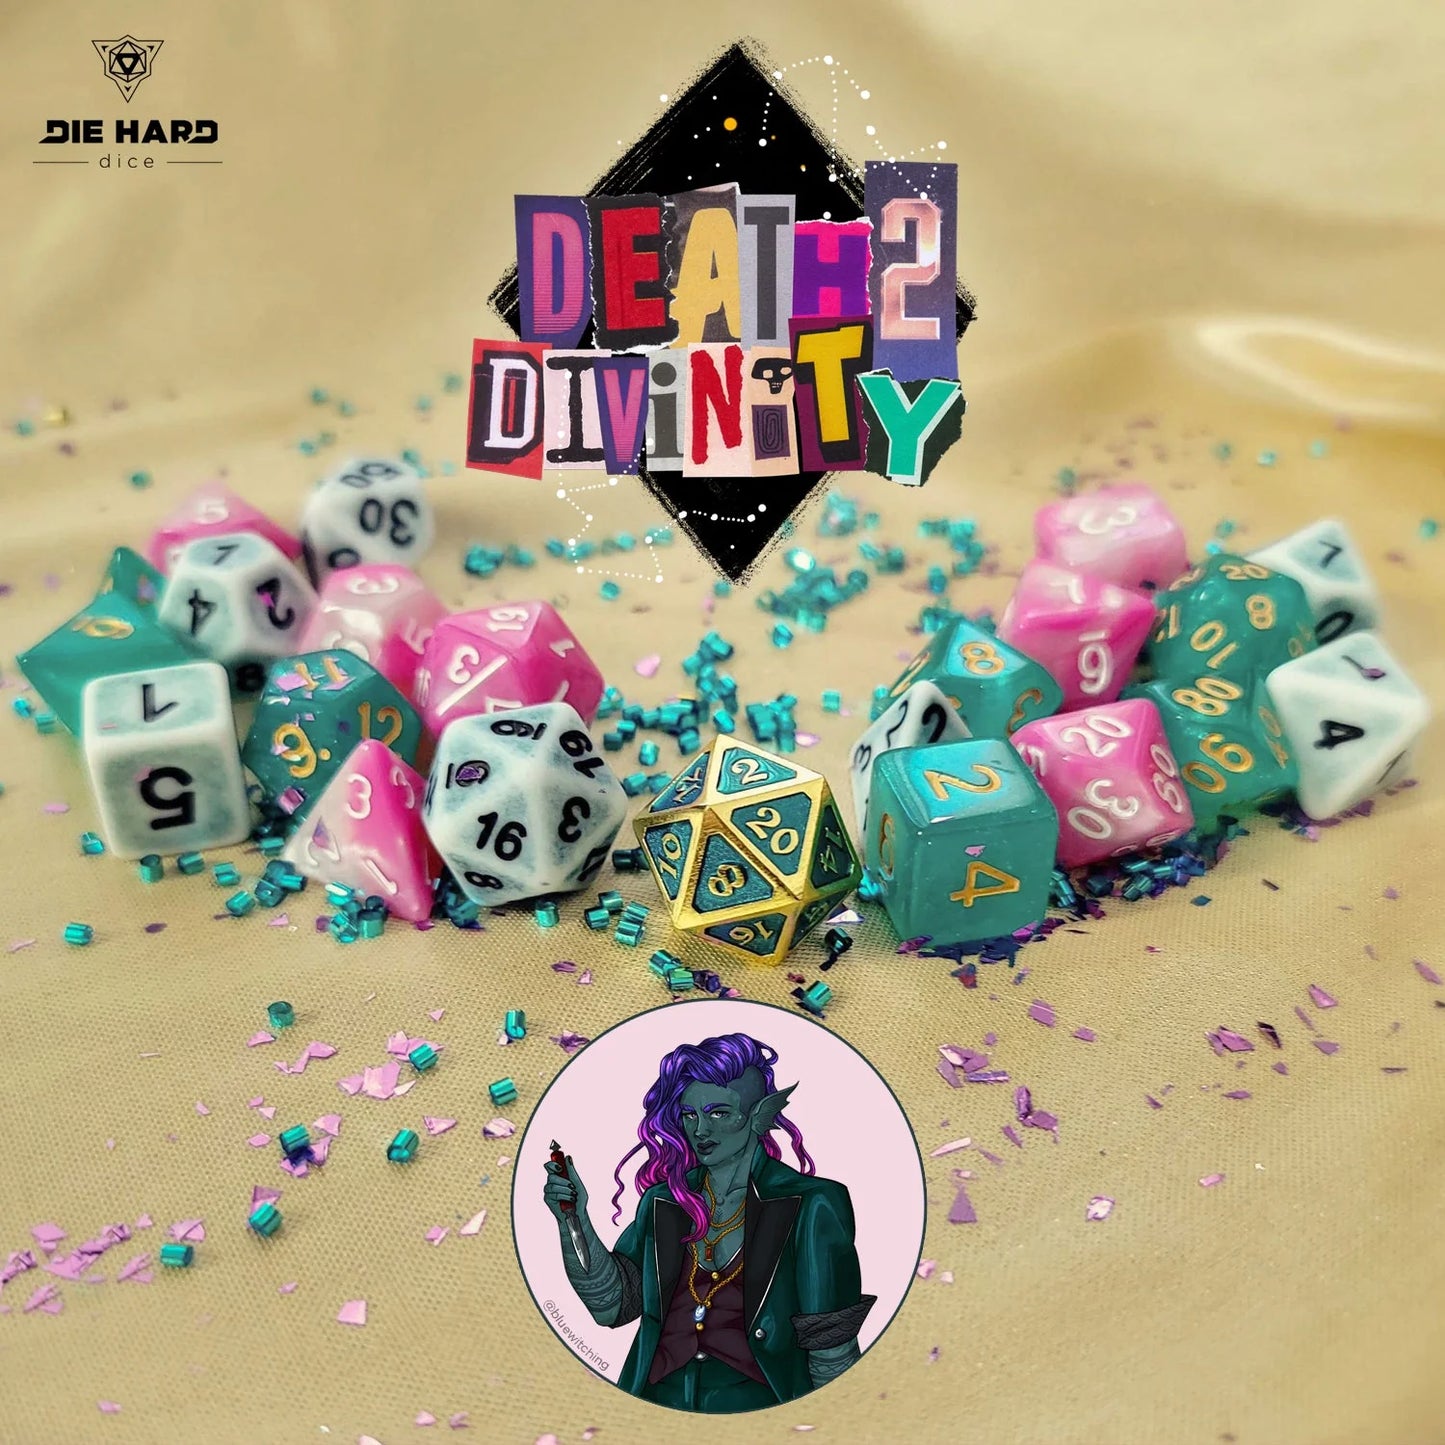 Character Palette Dice - Death 2 Divinity x Die Hard Dice